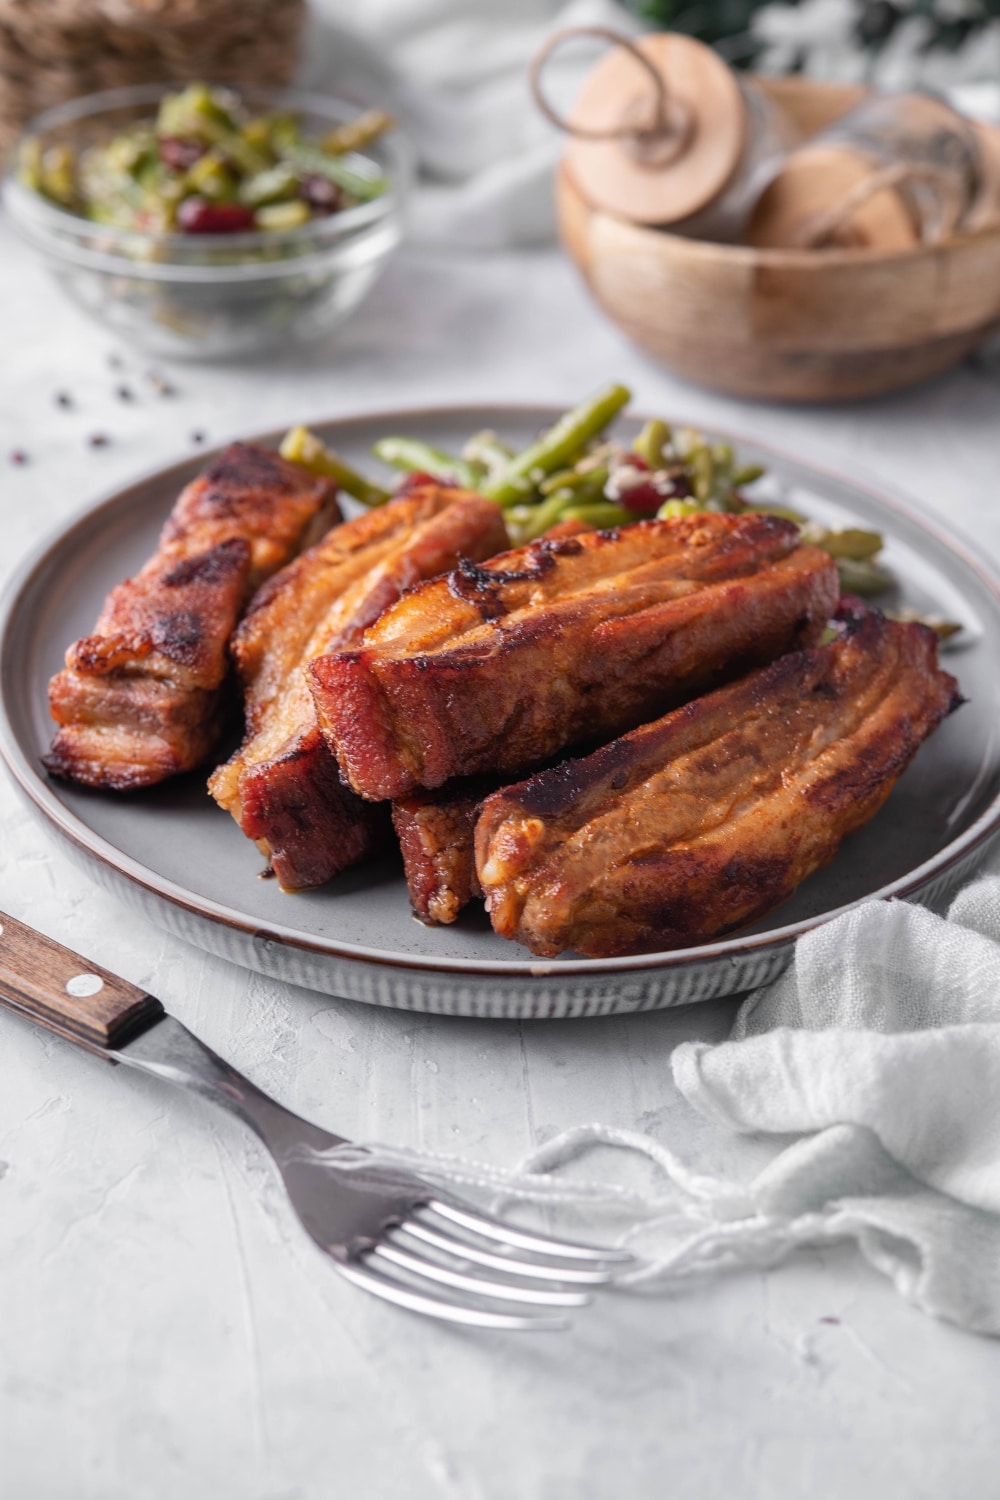 Roasted pork belly strips with green bean salad.